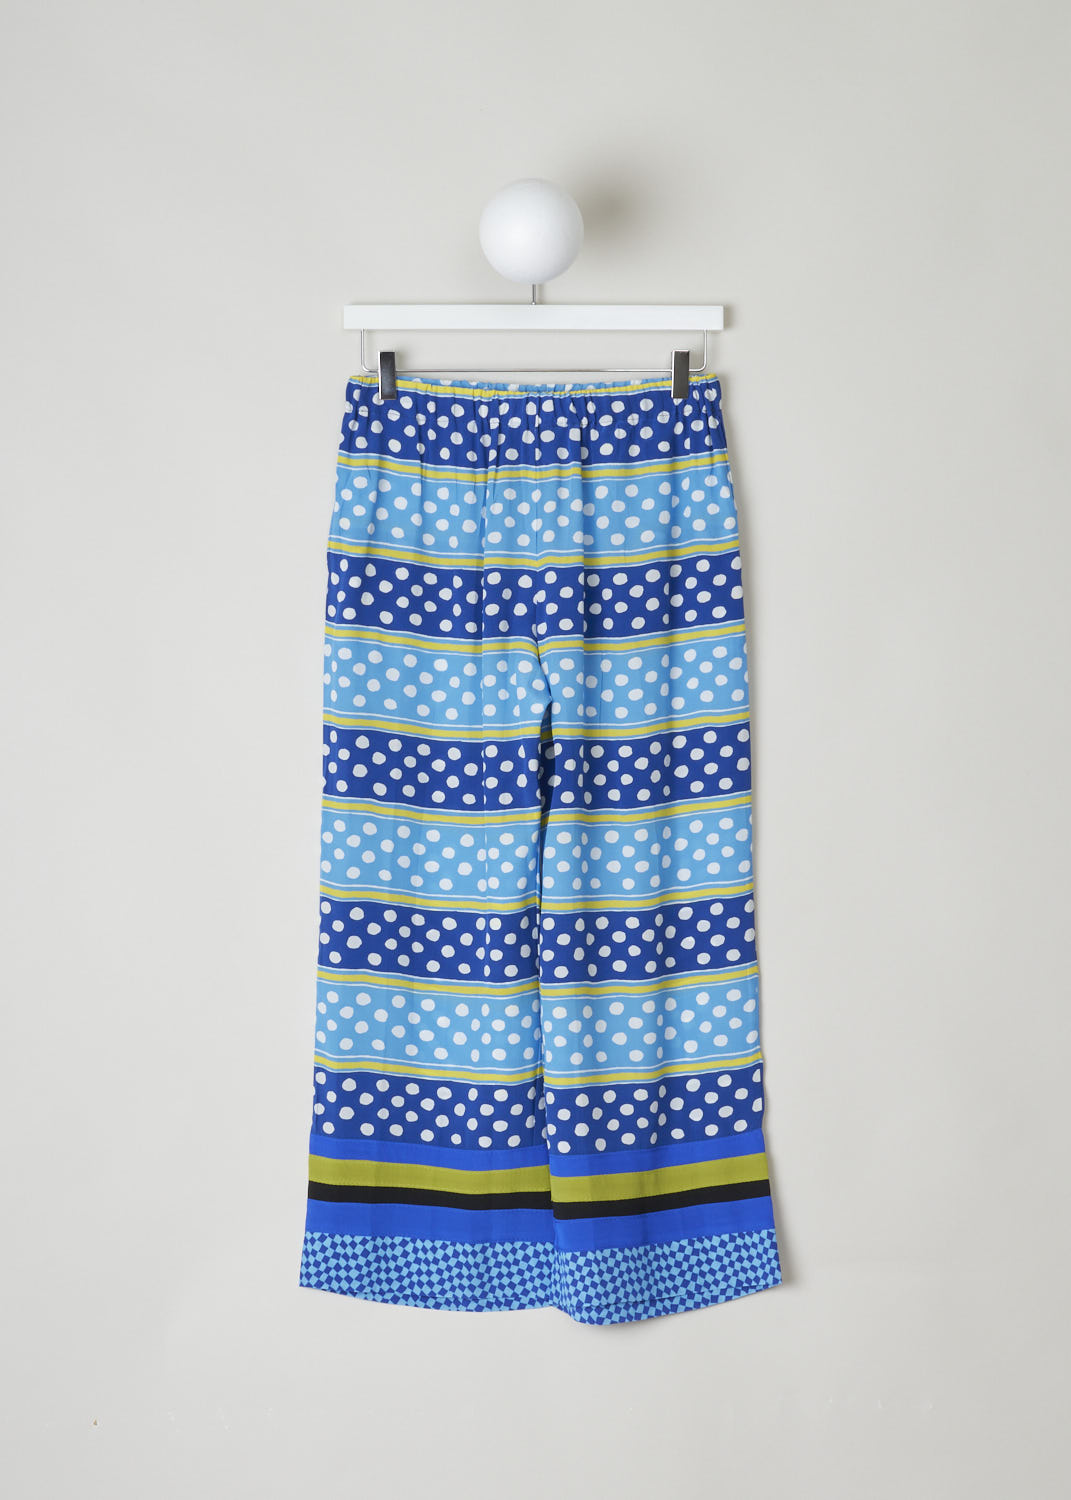 MARNI, COLORFUL SILK DOTS AND STRIPES PANTS, PAMA0304Q0_UTSF75_DS57, Blue, Print, Front, This cheerfully printed silk pants features a elasticated waist with drawstrings. Two concealed slanted pockets can be found on either side. A colorful broad trim decorates the hem.
